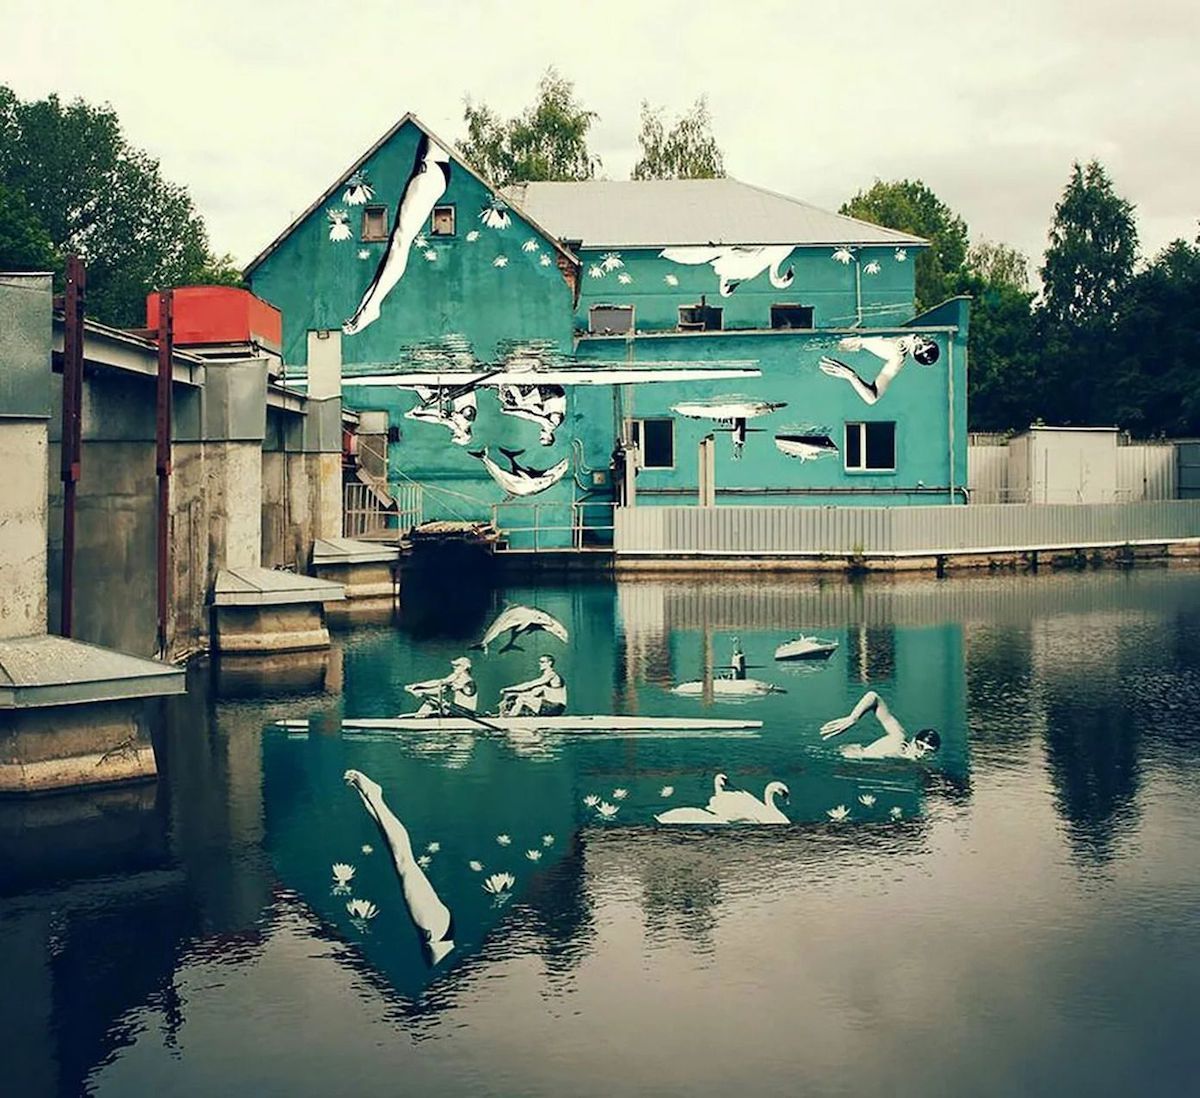 Ray Bartkus’ mural in Lithuania on the bank of the Šešupė river. Source: My Modern Met